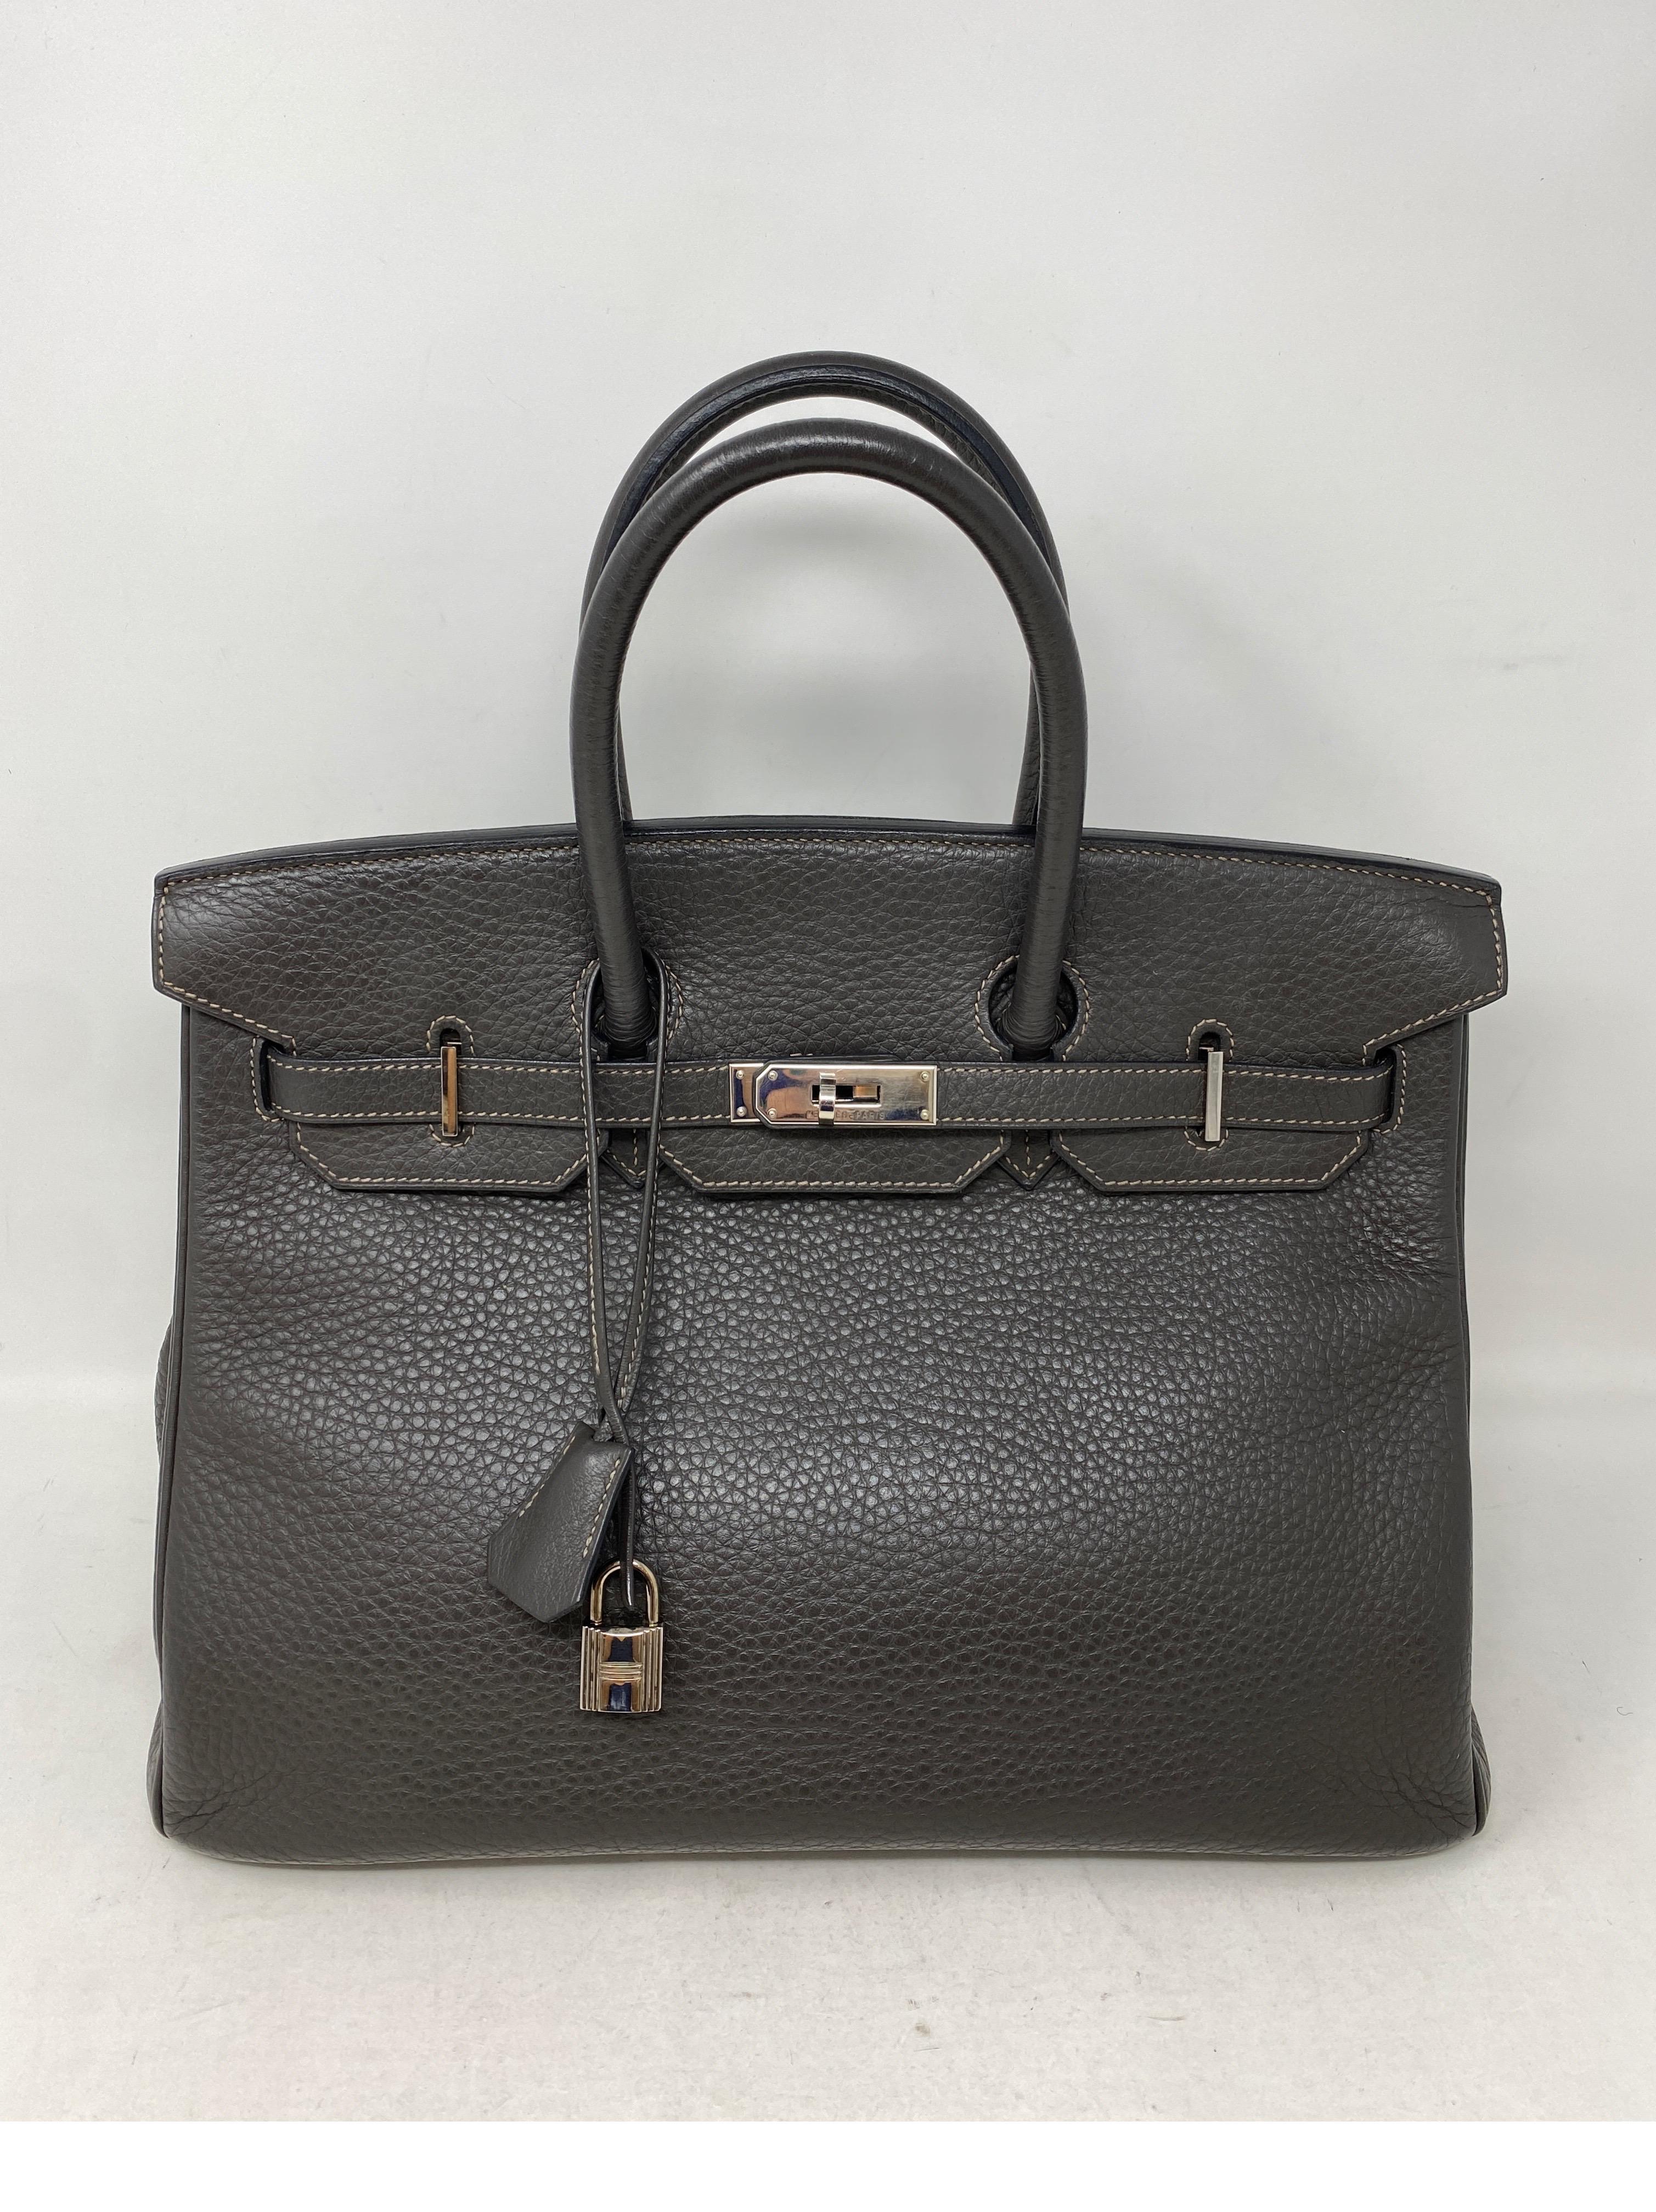 Hermes Birkin 35 Graphite Bag. Palladium hardware. Good condition. Great neutral color. Close to black/ dark grey color. Clemence leather. F stamp. Guaranteed authentic. 